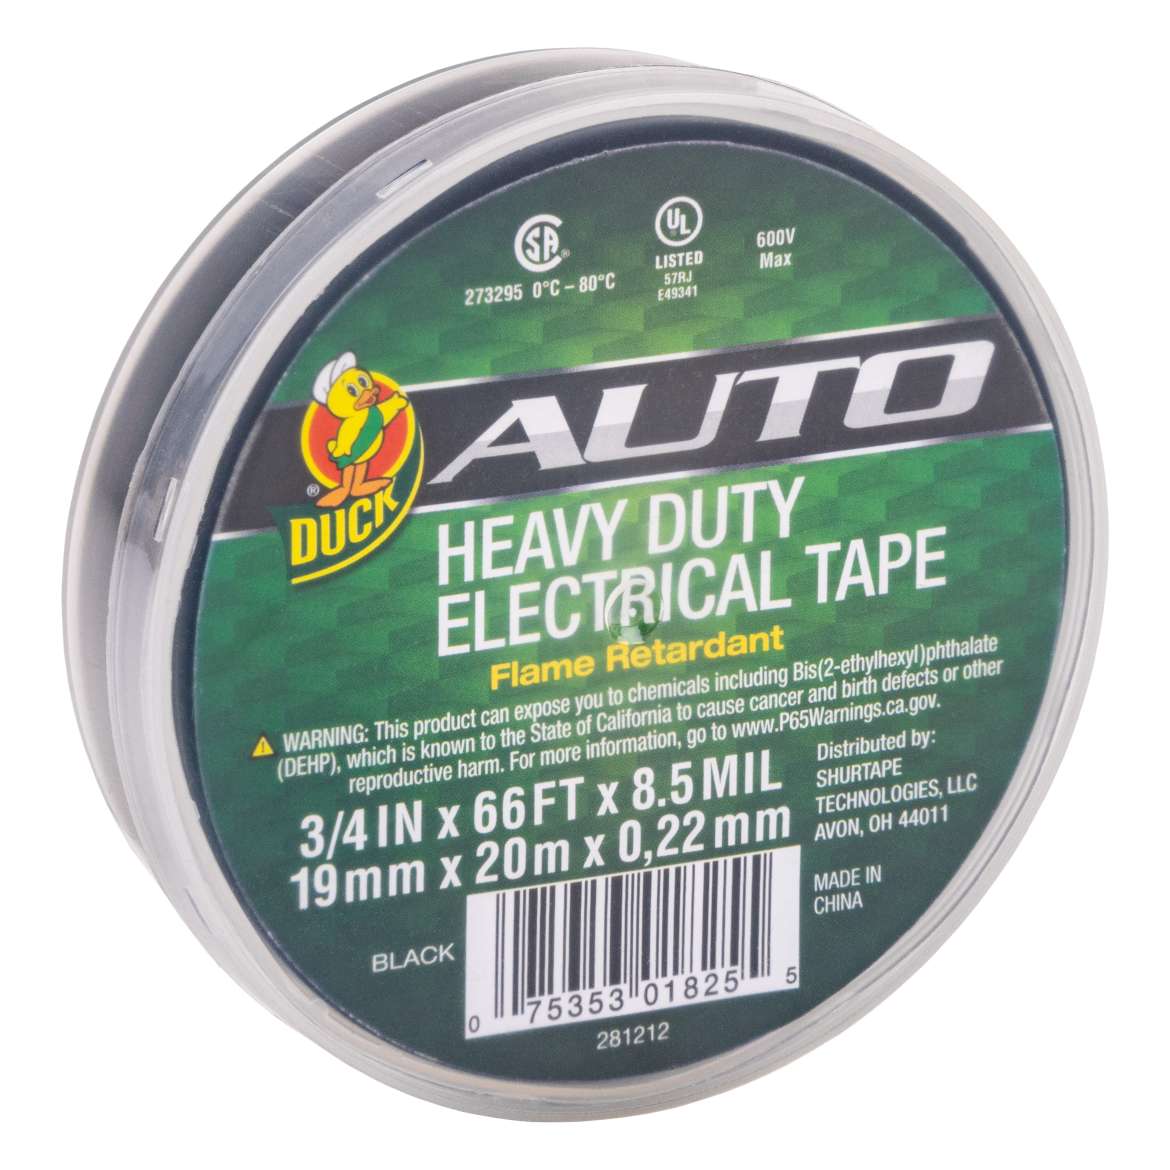 Heavy Duty Auto Electrical Tape Image